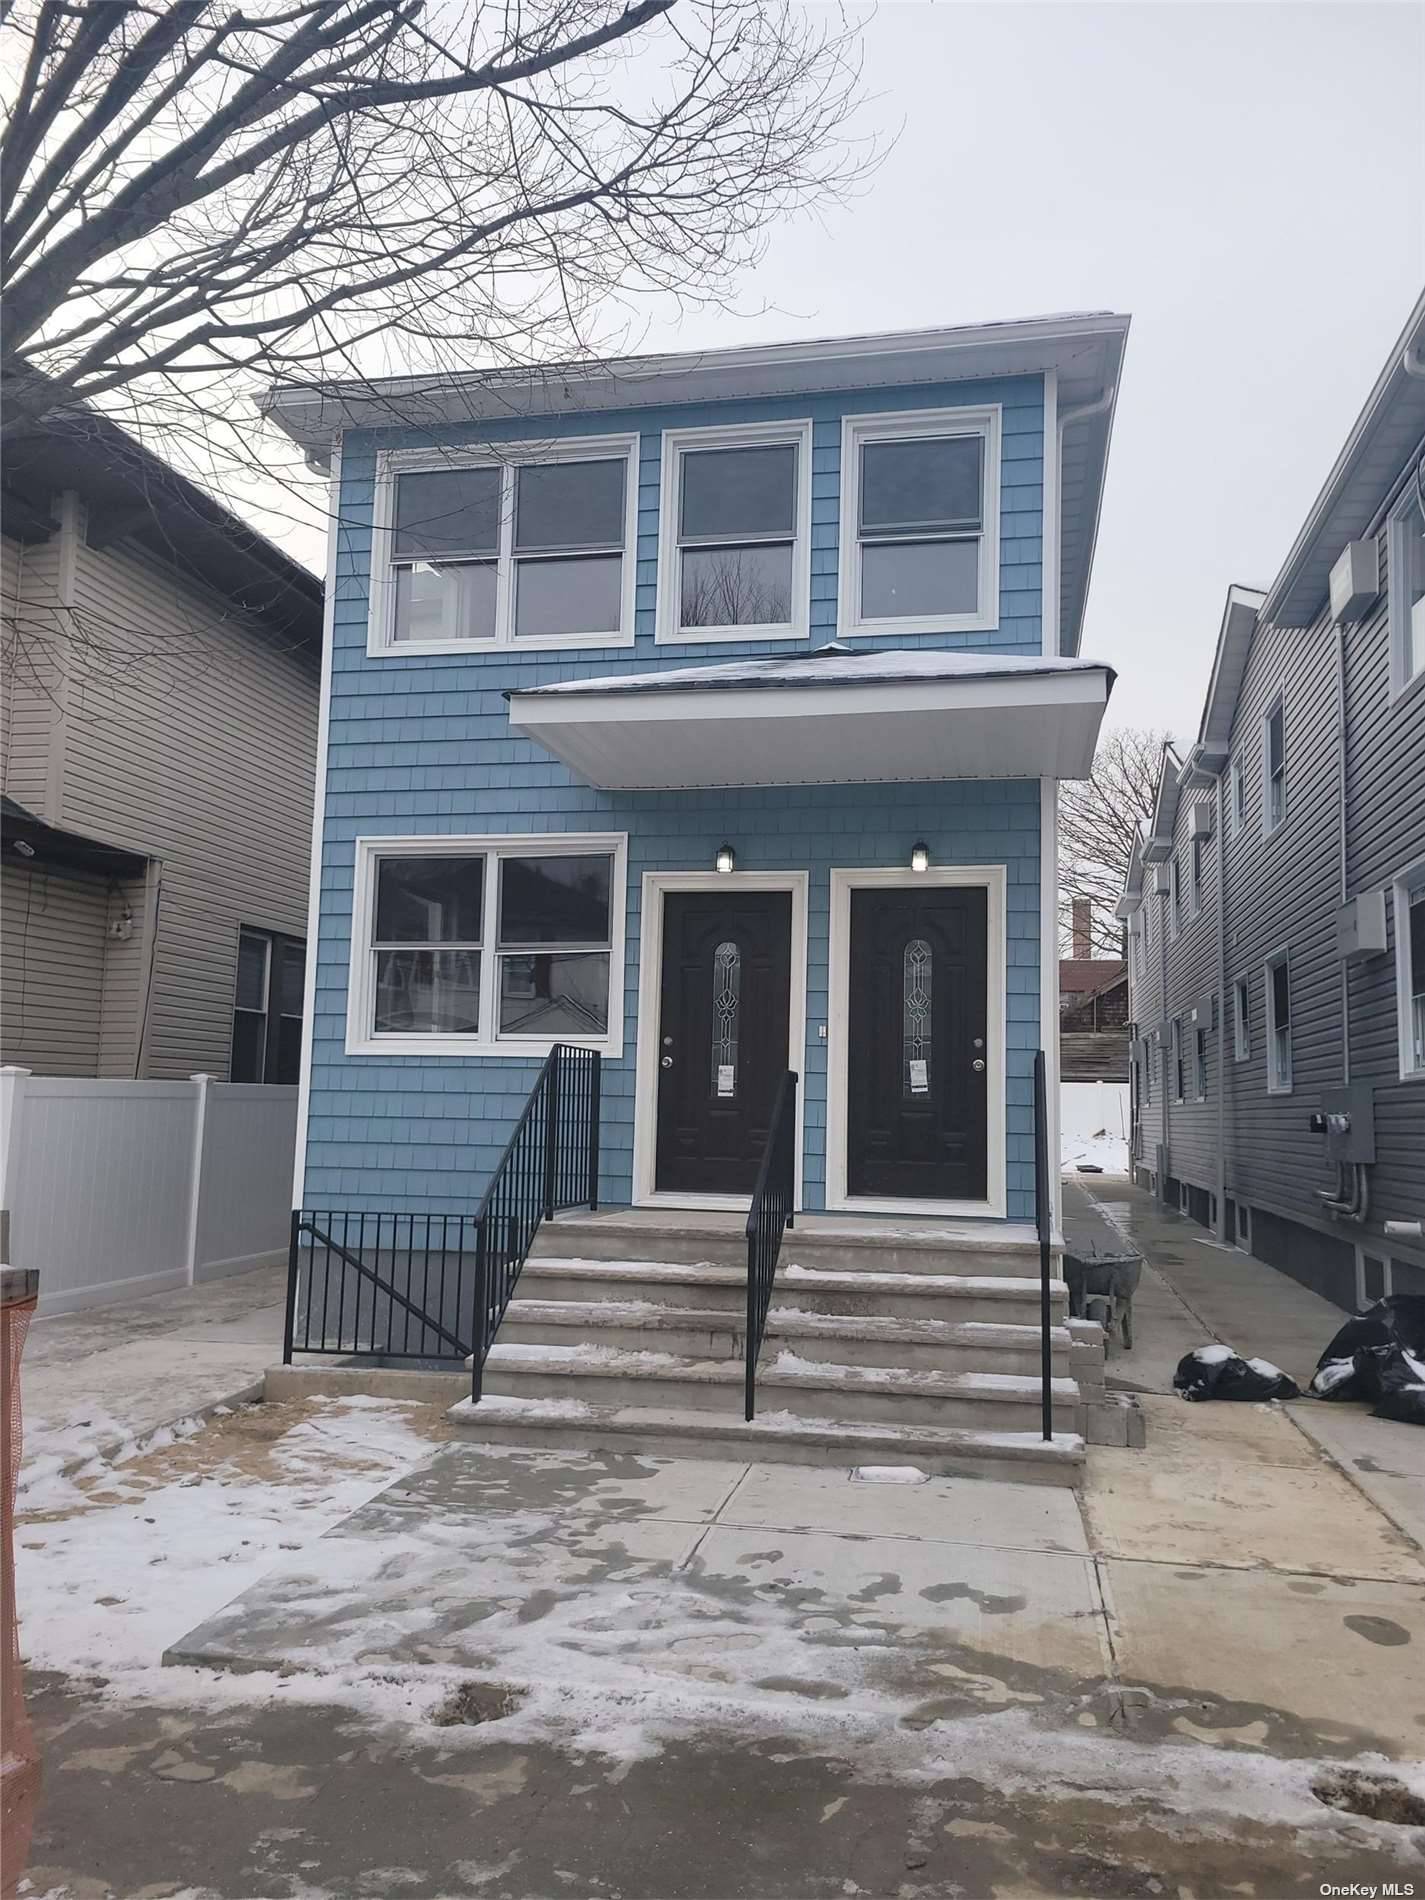 New construction 2 family house Build on 17x80 each floor is about 1360 square fool 3 large bedroom on each floor, 2 full bath on each floor, full basement with ...